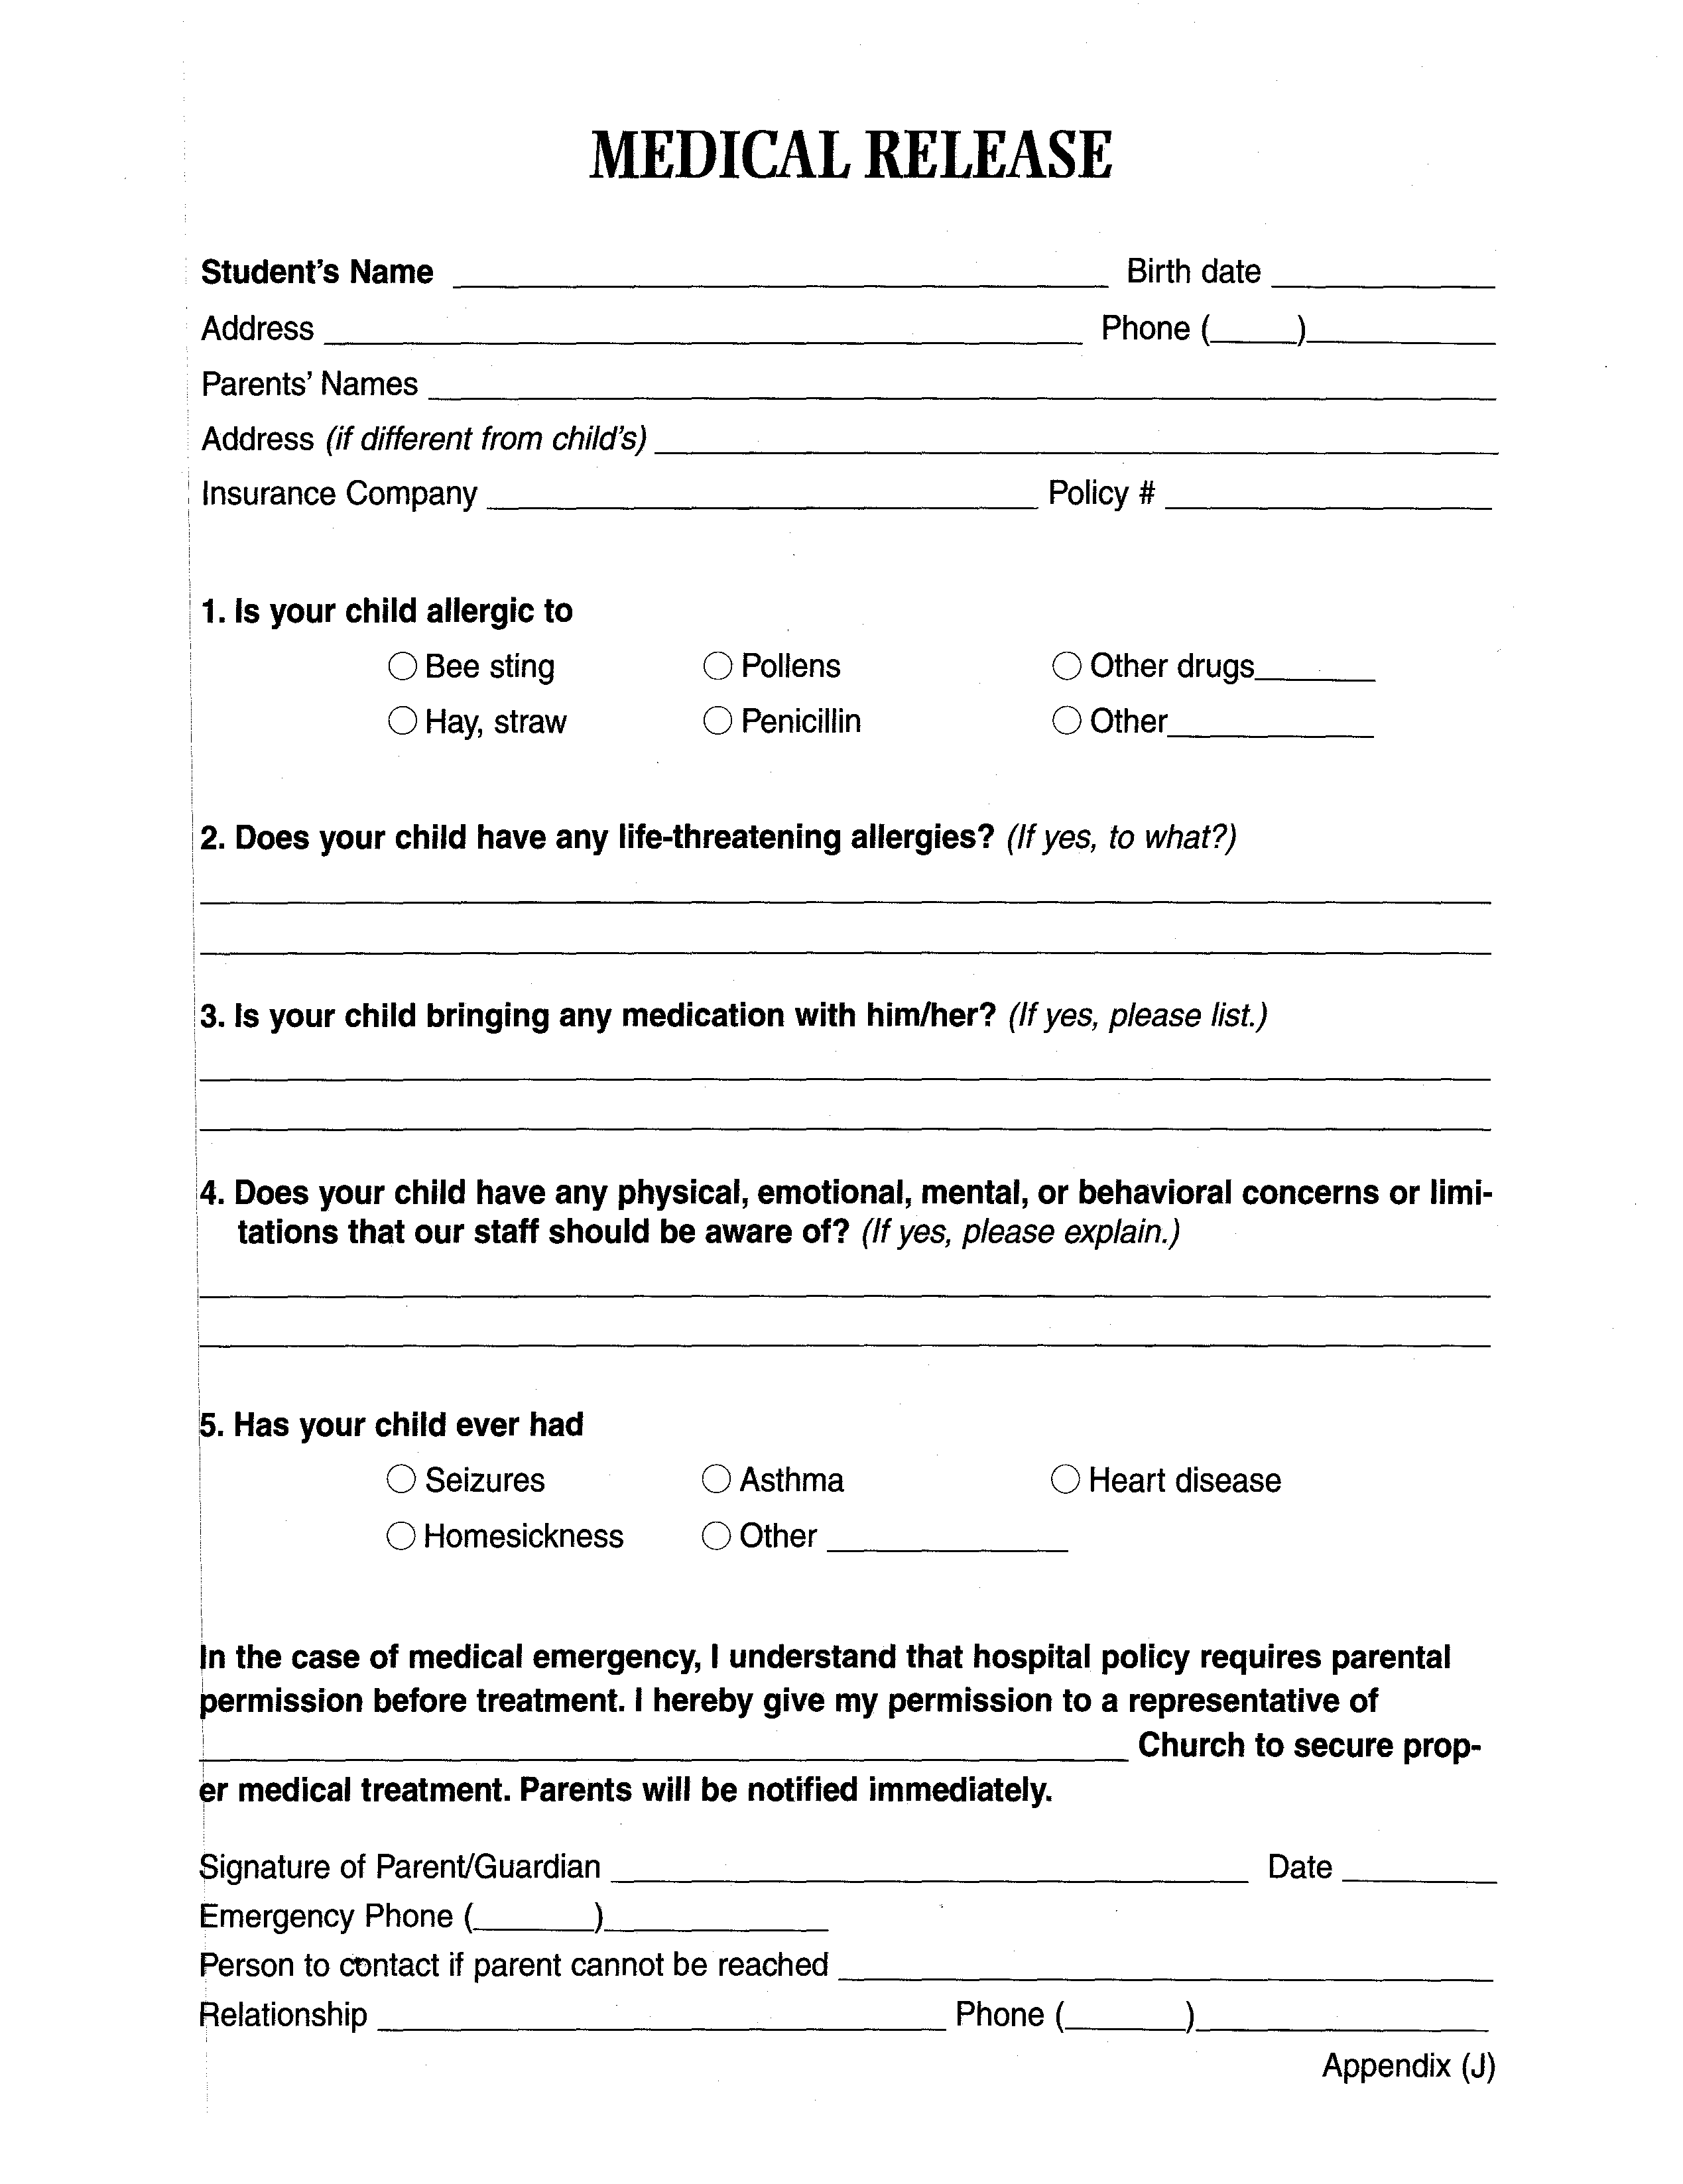 18 and older adult liability medical release form